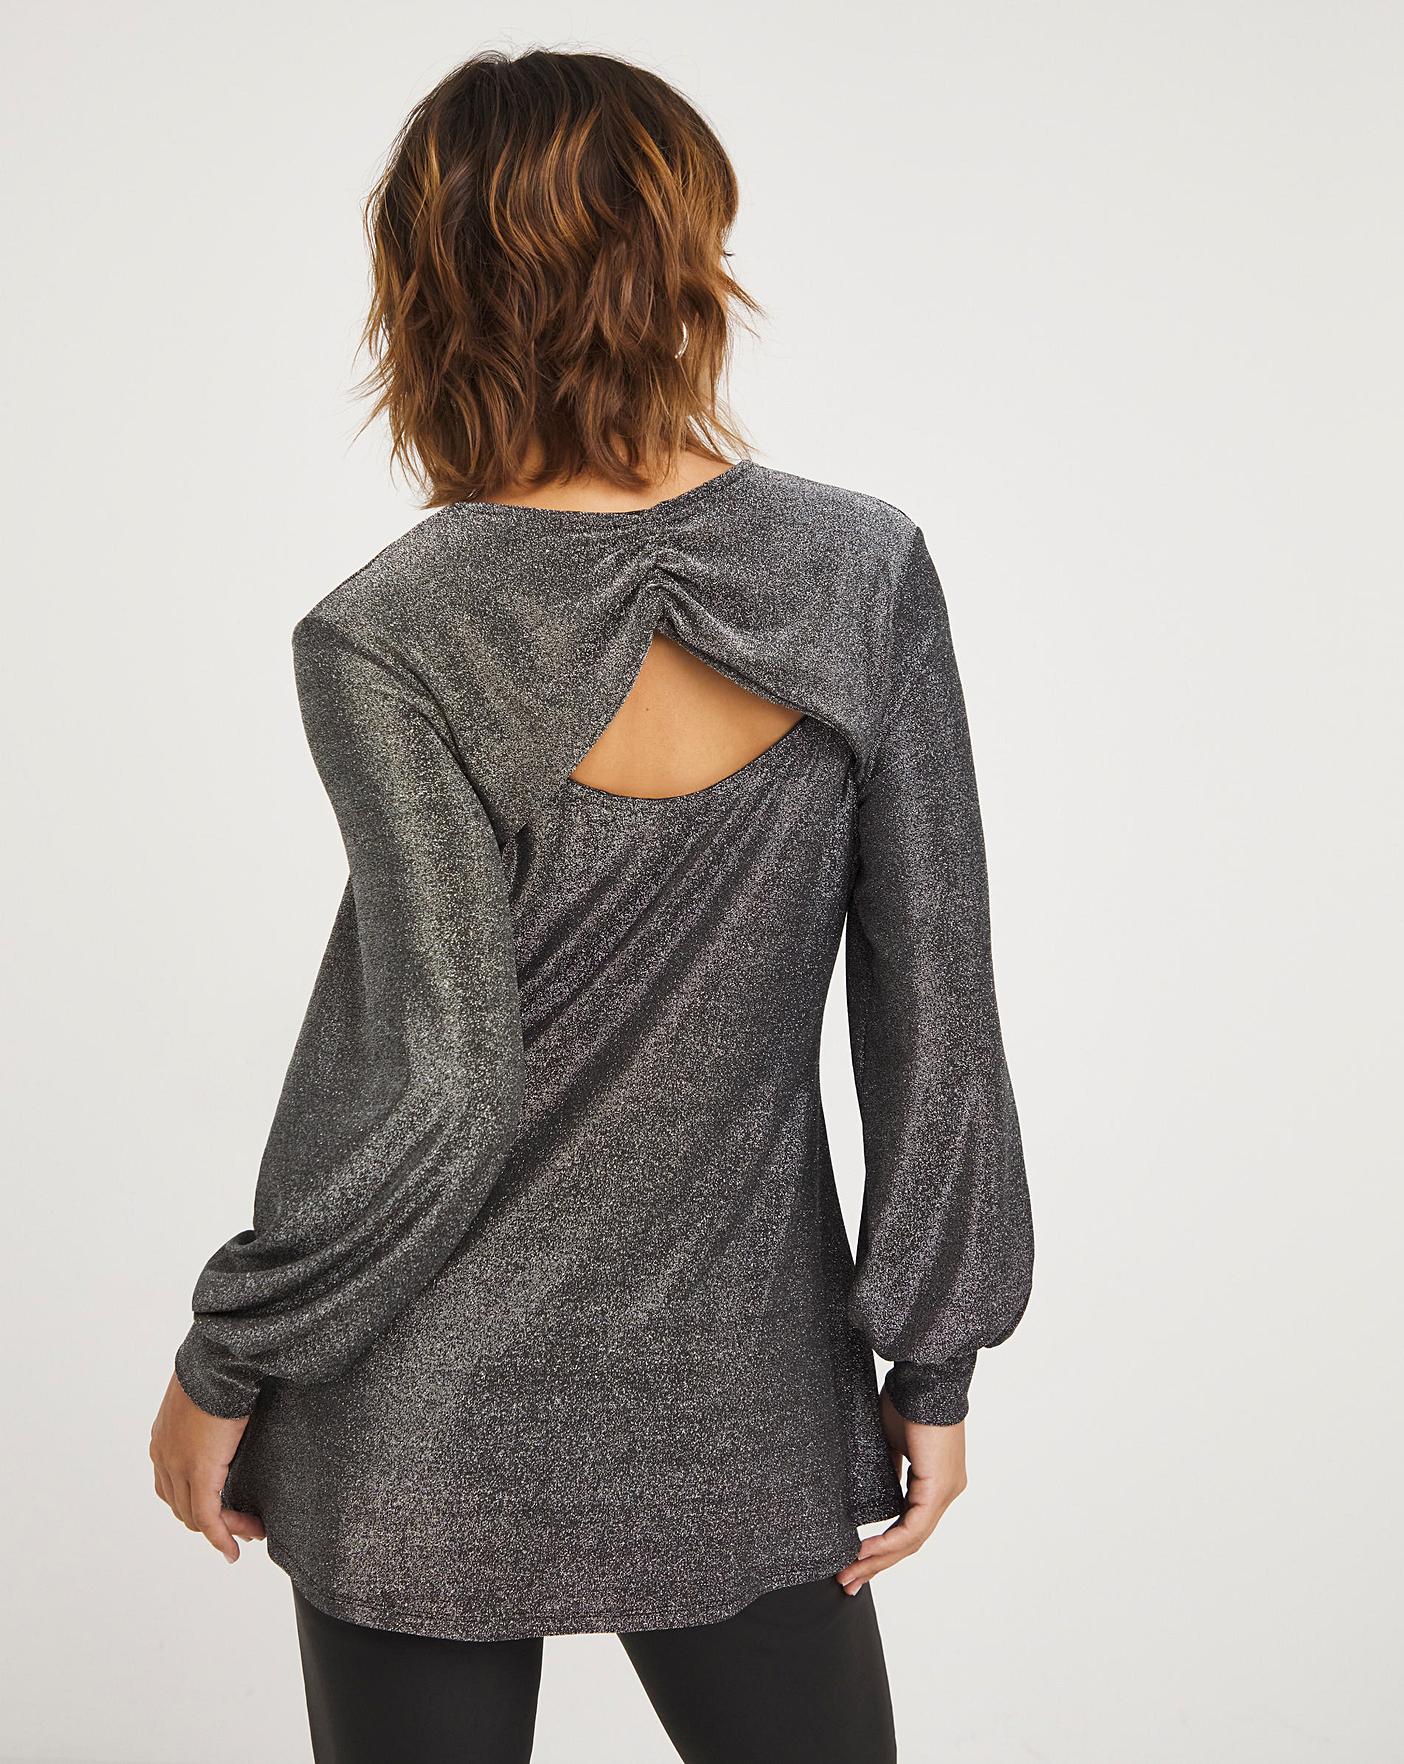 Long Sleeve Cut Out Back Detail Top | J D Williams